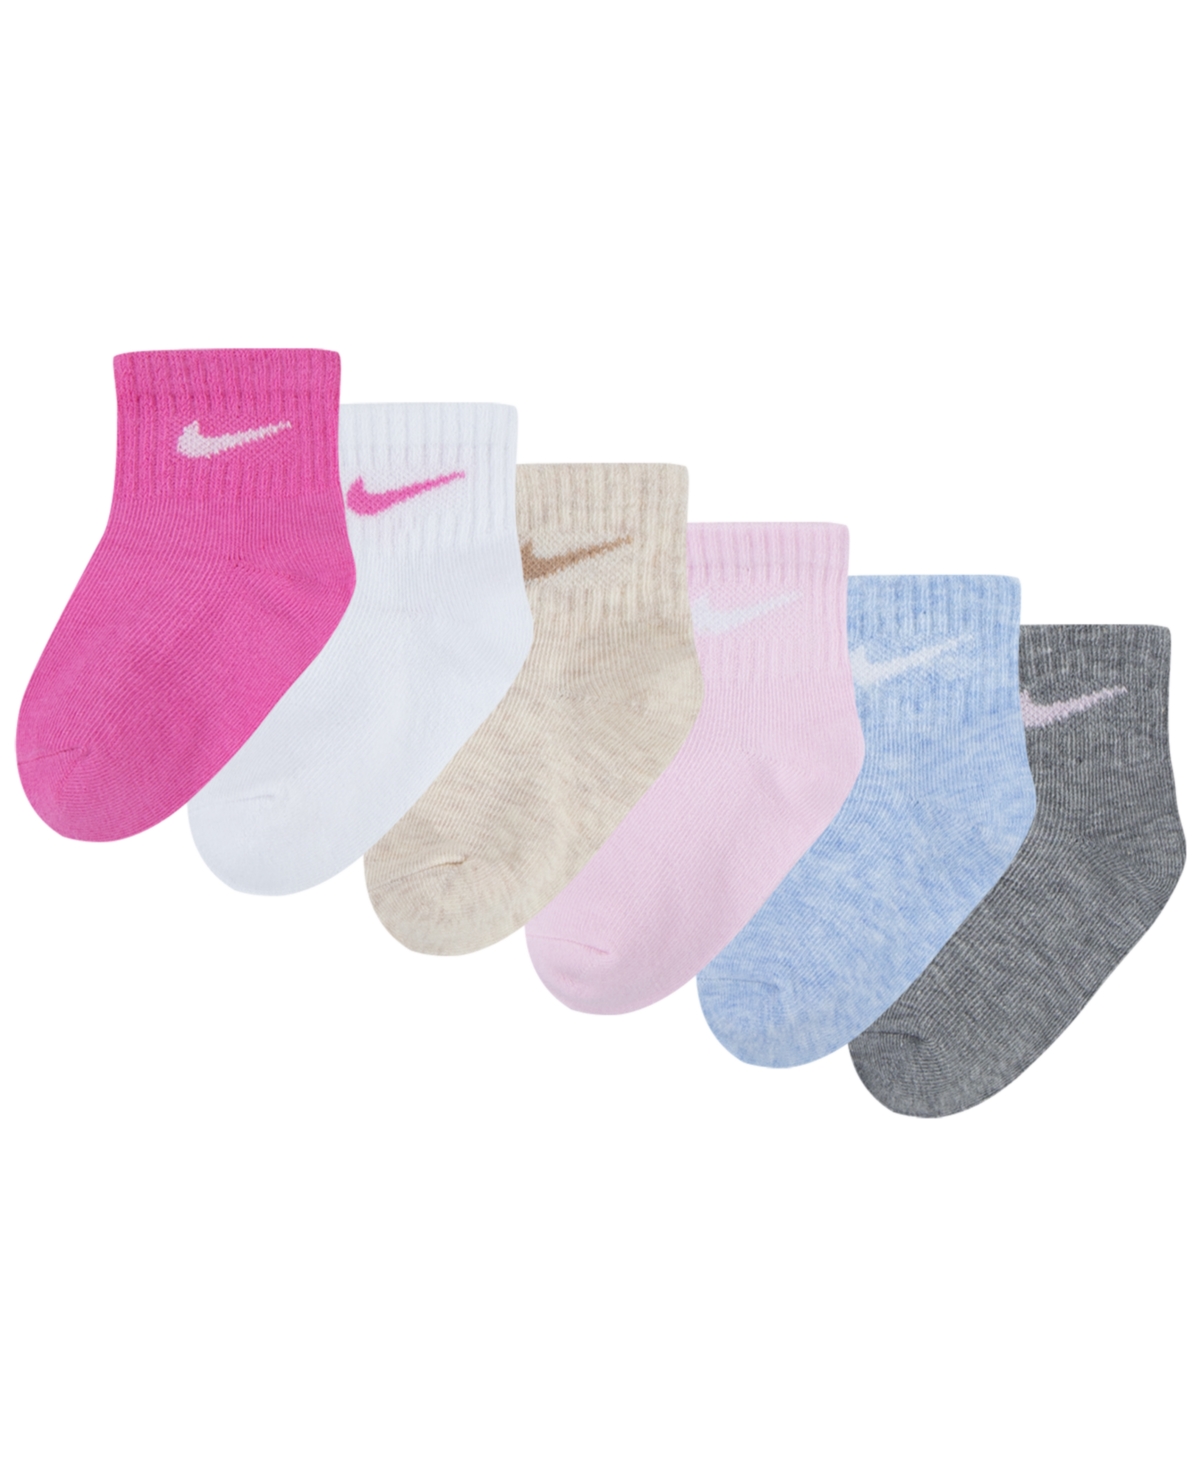 Nike Baby Boys Or Baby Girls Ankle Socks 6-pack In Playful Pink